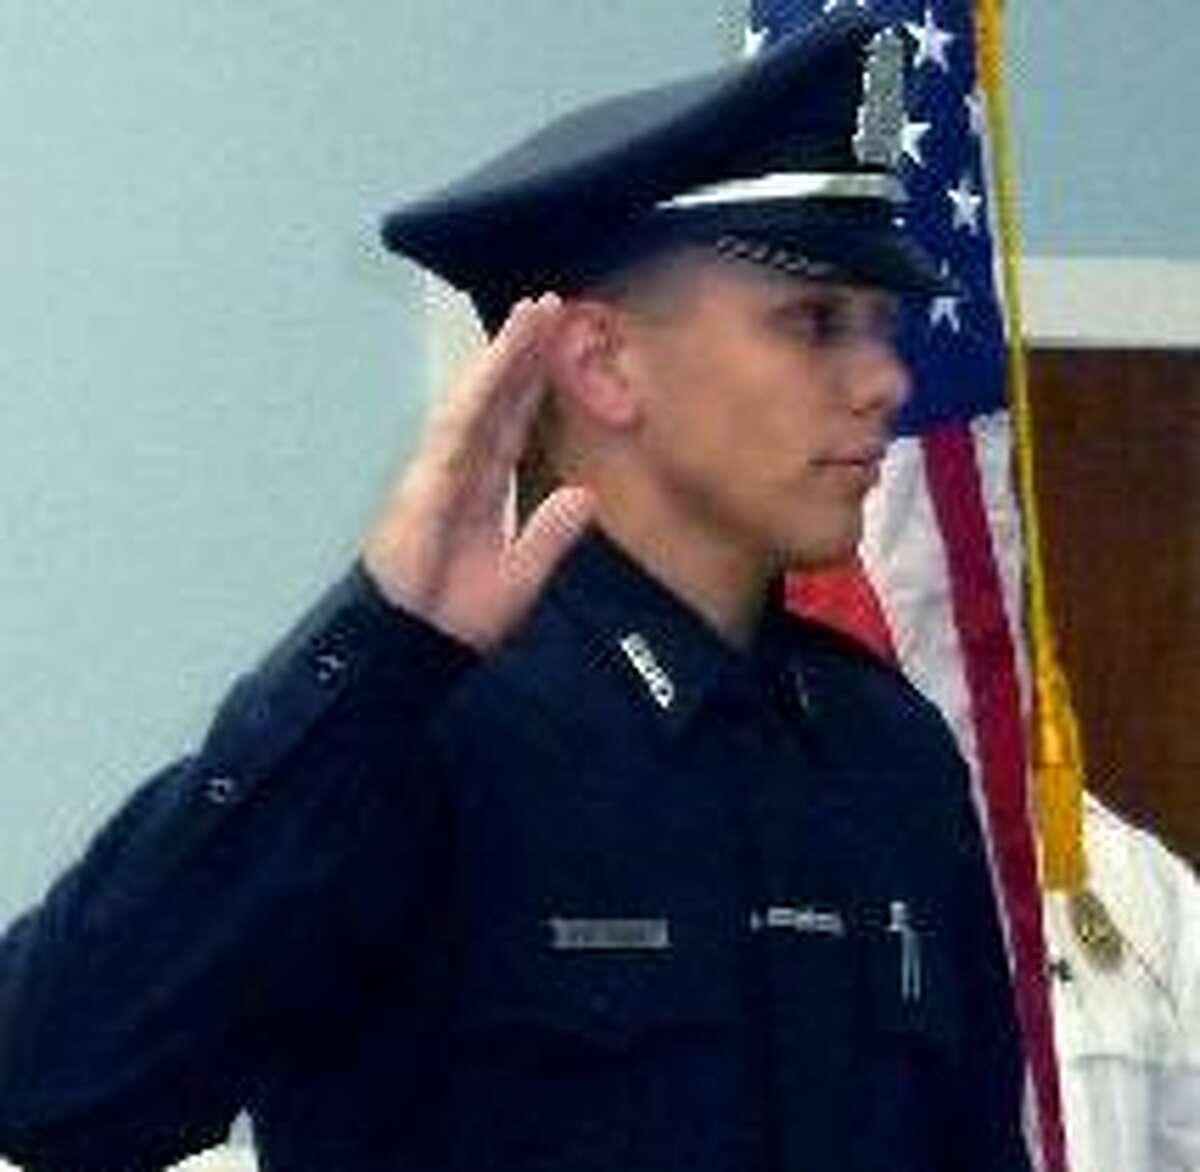 Officer Alex Relyea is sworn into the New Milford Police Department in 2012. Relyea has been a Danbury police Officer for four years.